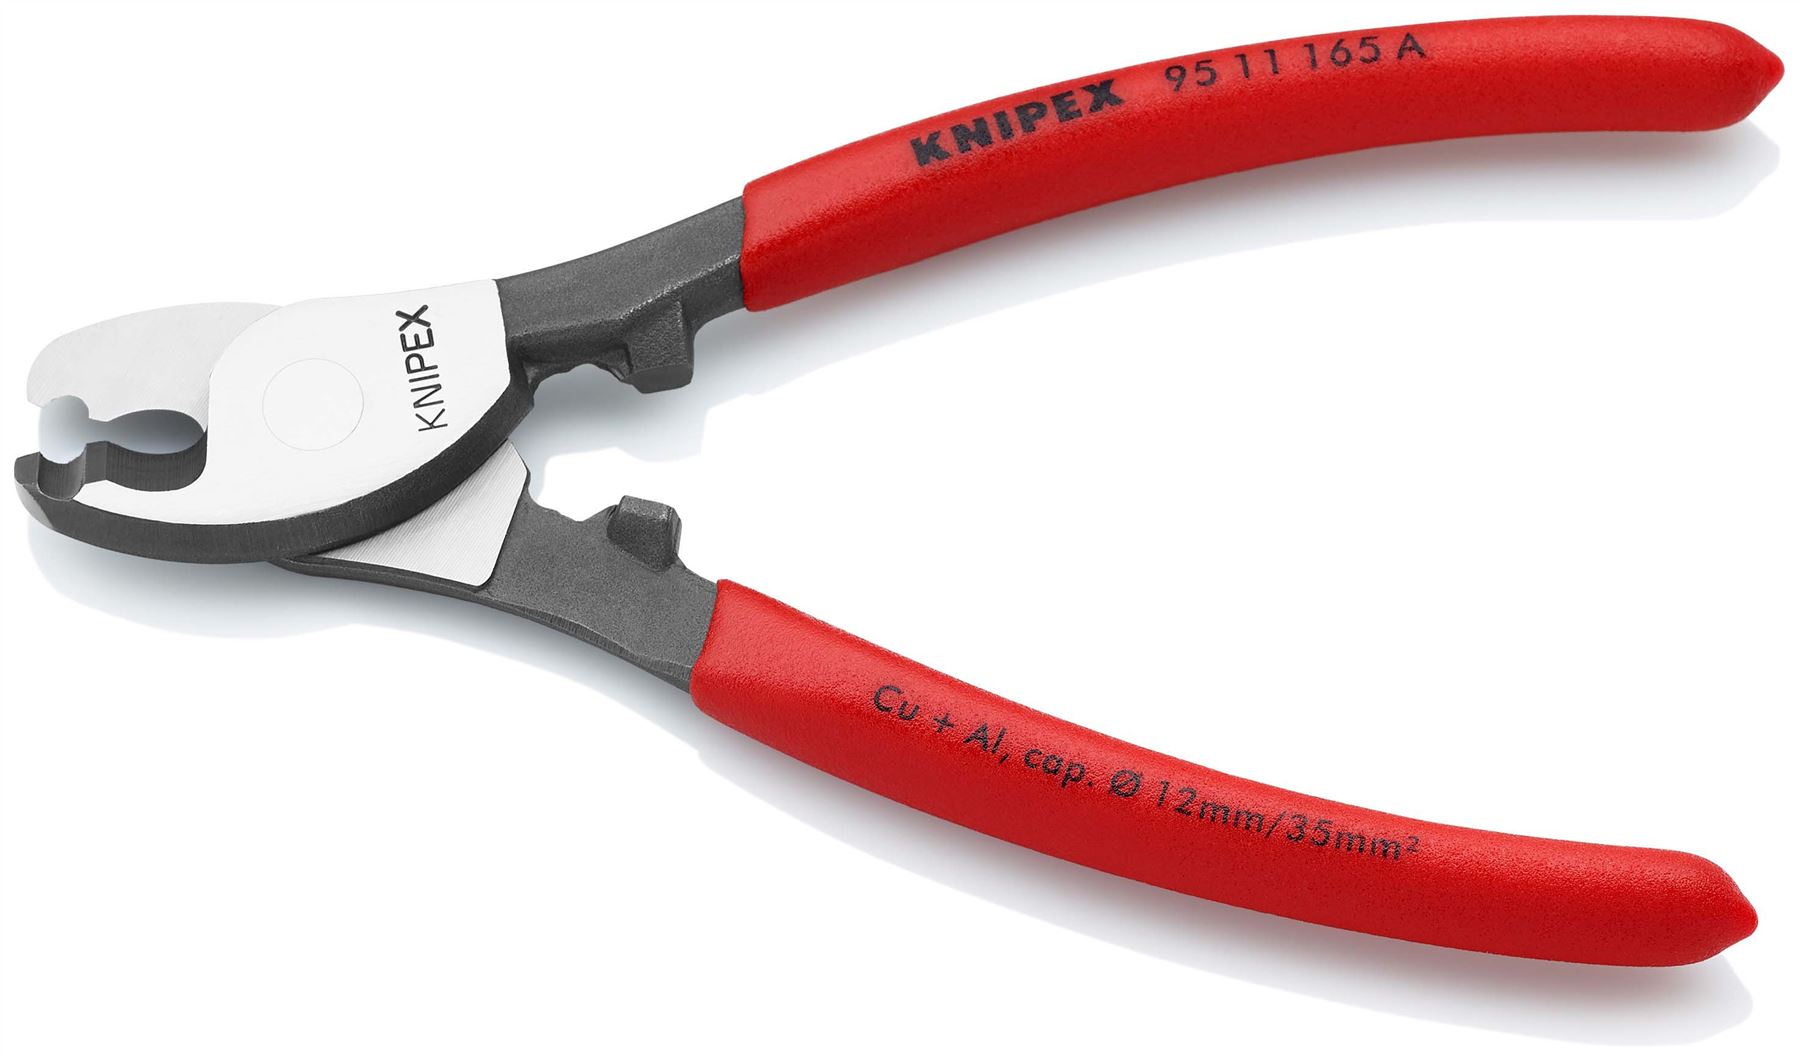 KNIPEX Cable Shears Cutting Pliers Cuts Cable up to 12mm Diameter 165mm Plastic Coated Handles 95 11 165 A